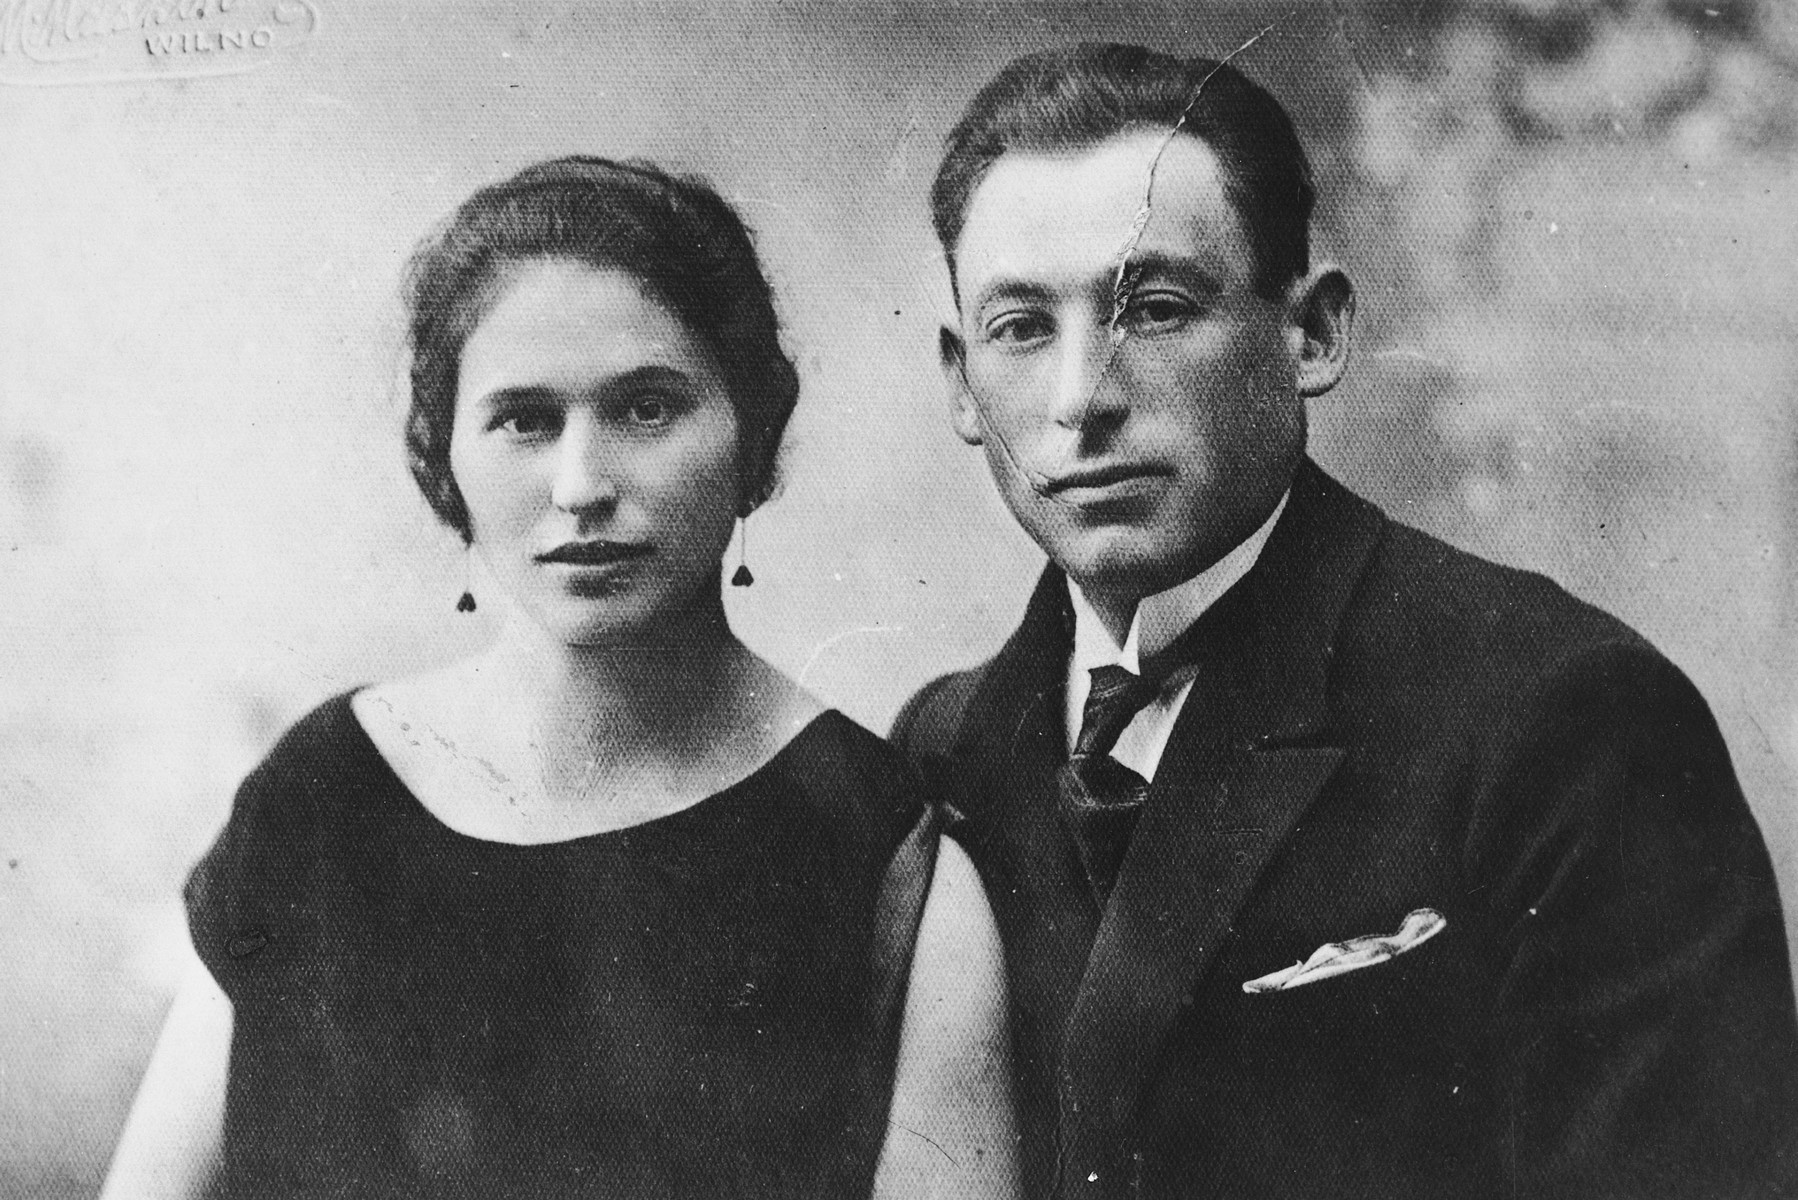 Prewar studio portrait of Basia and Moshe Gordon.  Their daughter later saved this photograph by keeping it with her in hiding.